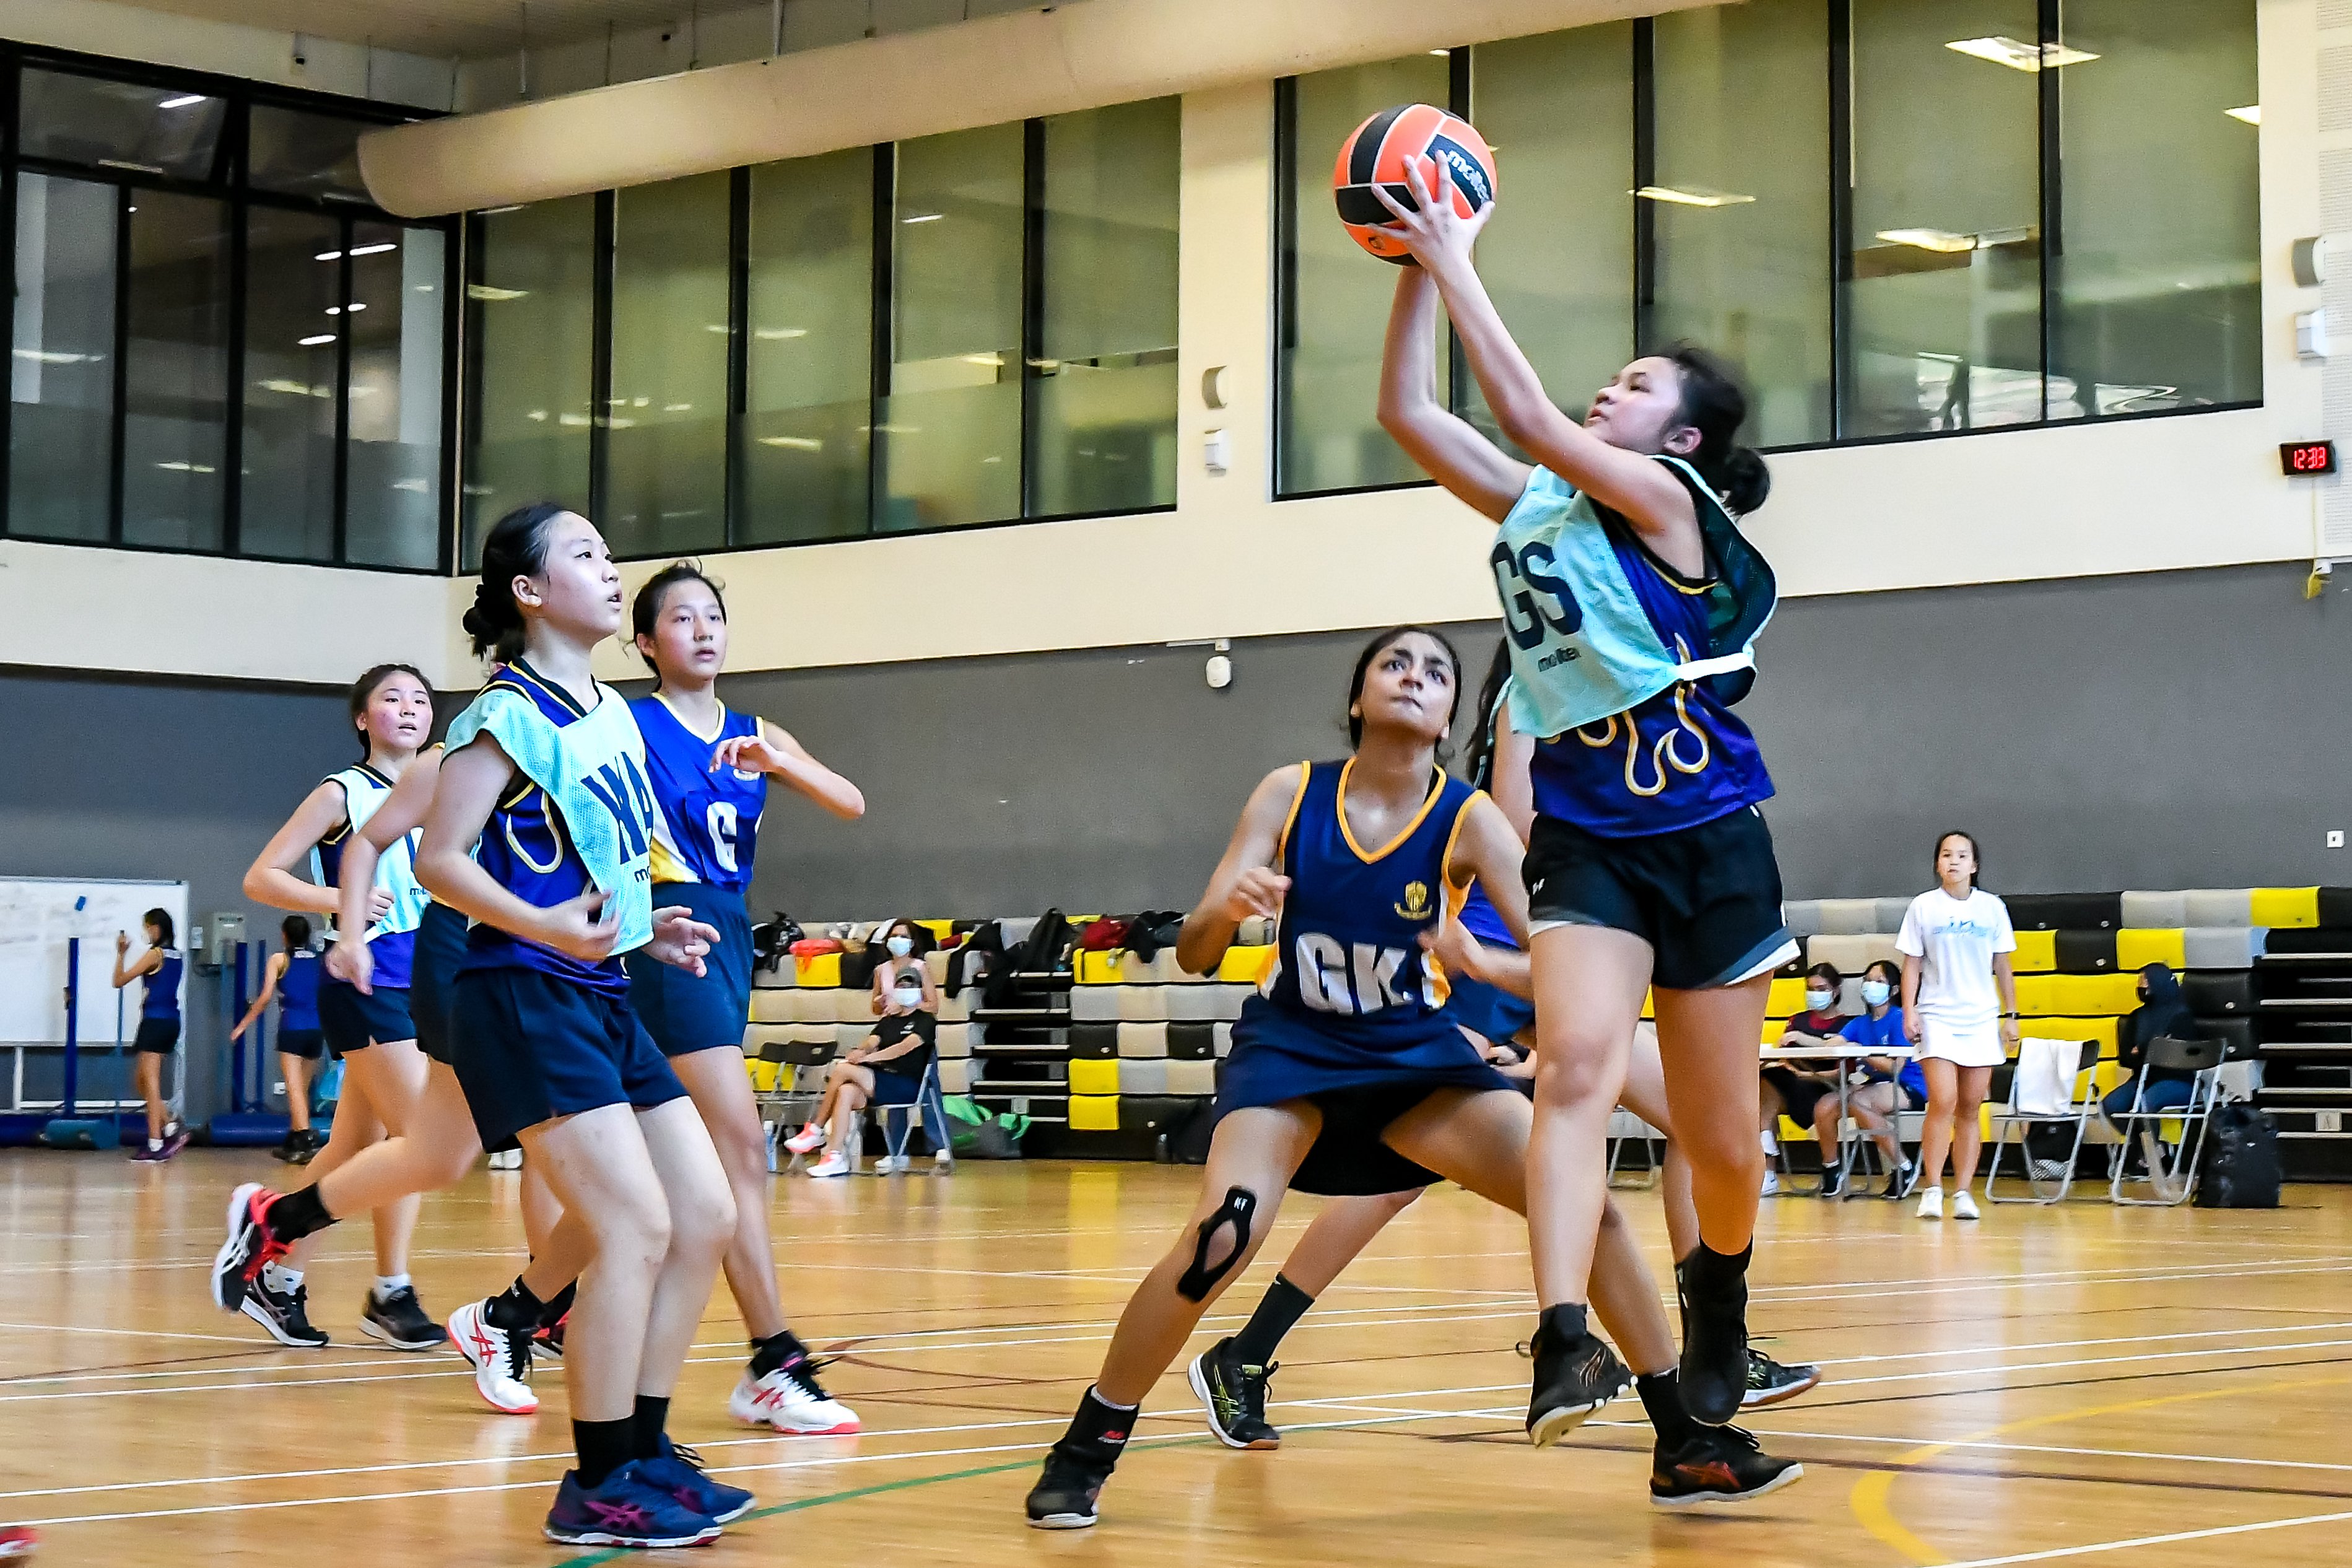 Sch-East-B Div Netball TNVictorNg-SACSS_GS-making another attempt at goal-NB27